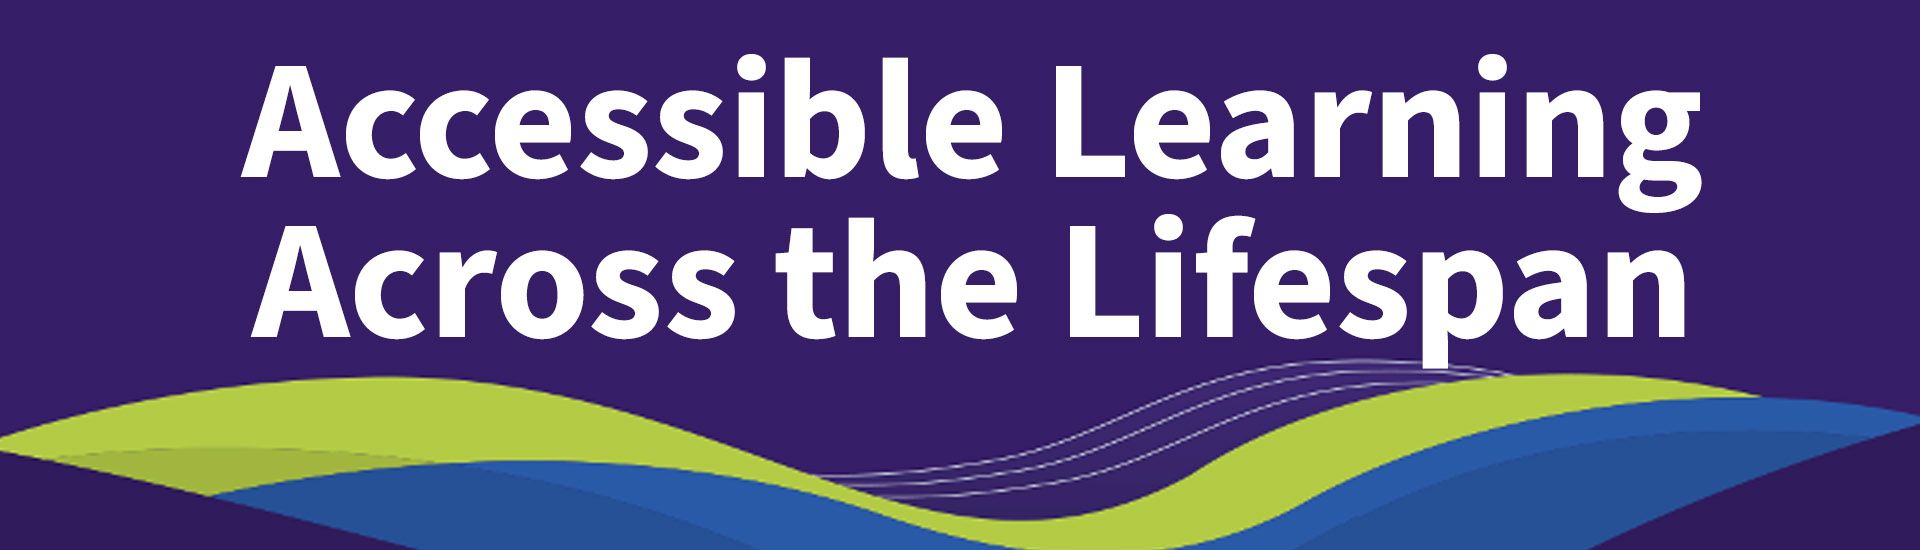 Accessible Learning Across the Lifespan